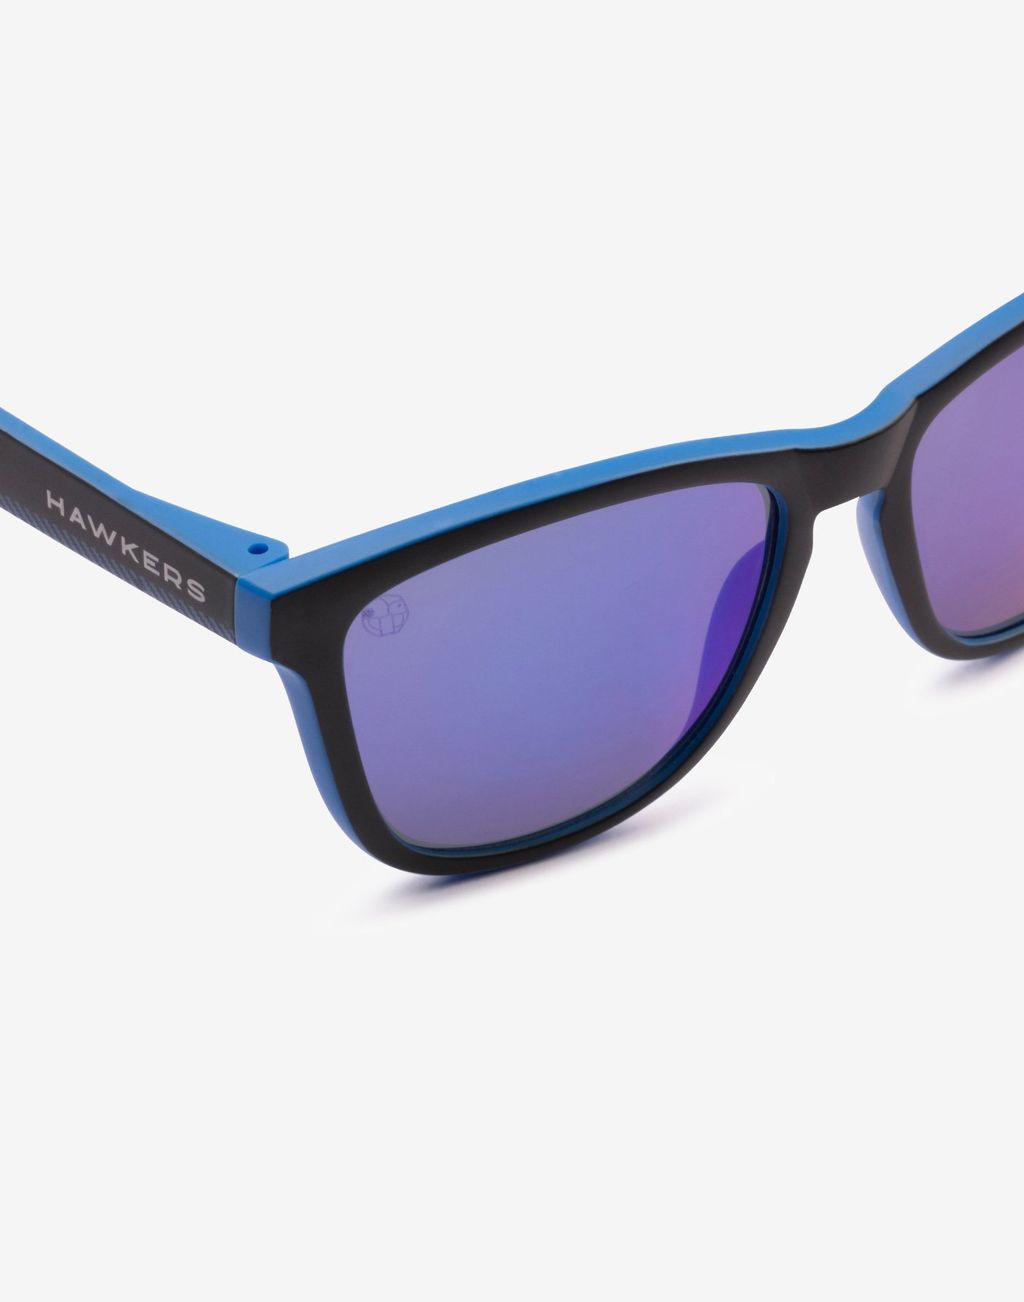 HAWKERS X FOROCOCHES CARBON BLUE SKY ONE – DD STORE